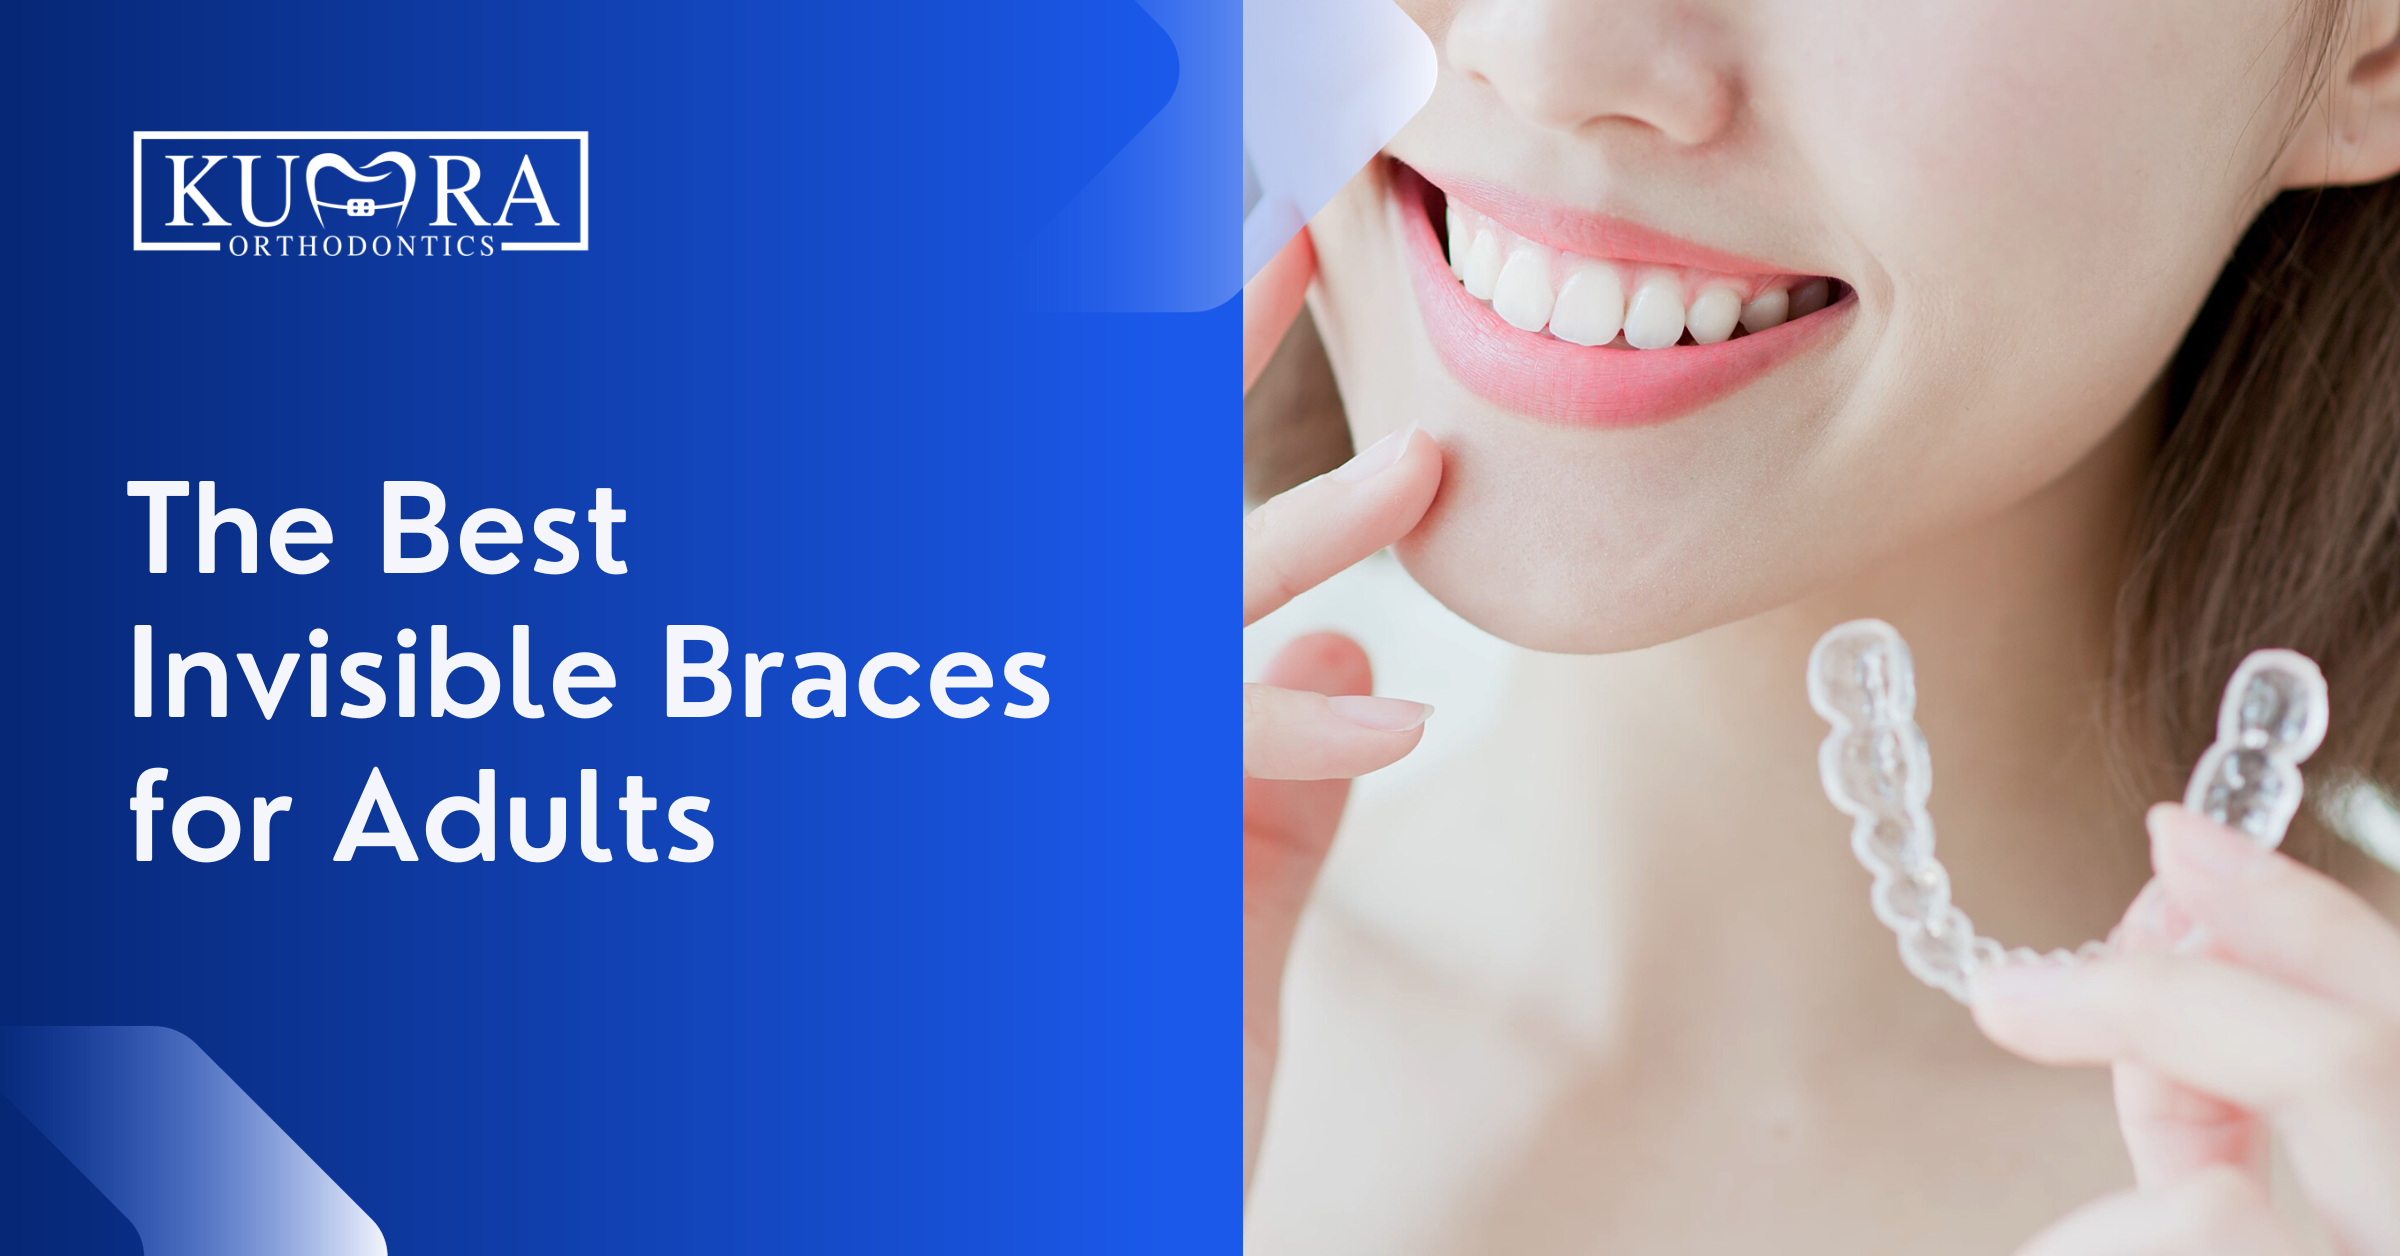 Invisible Braces: The Most Popular Way to Straighten Teeth